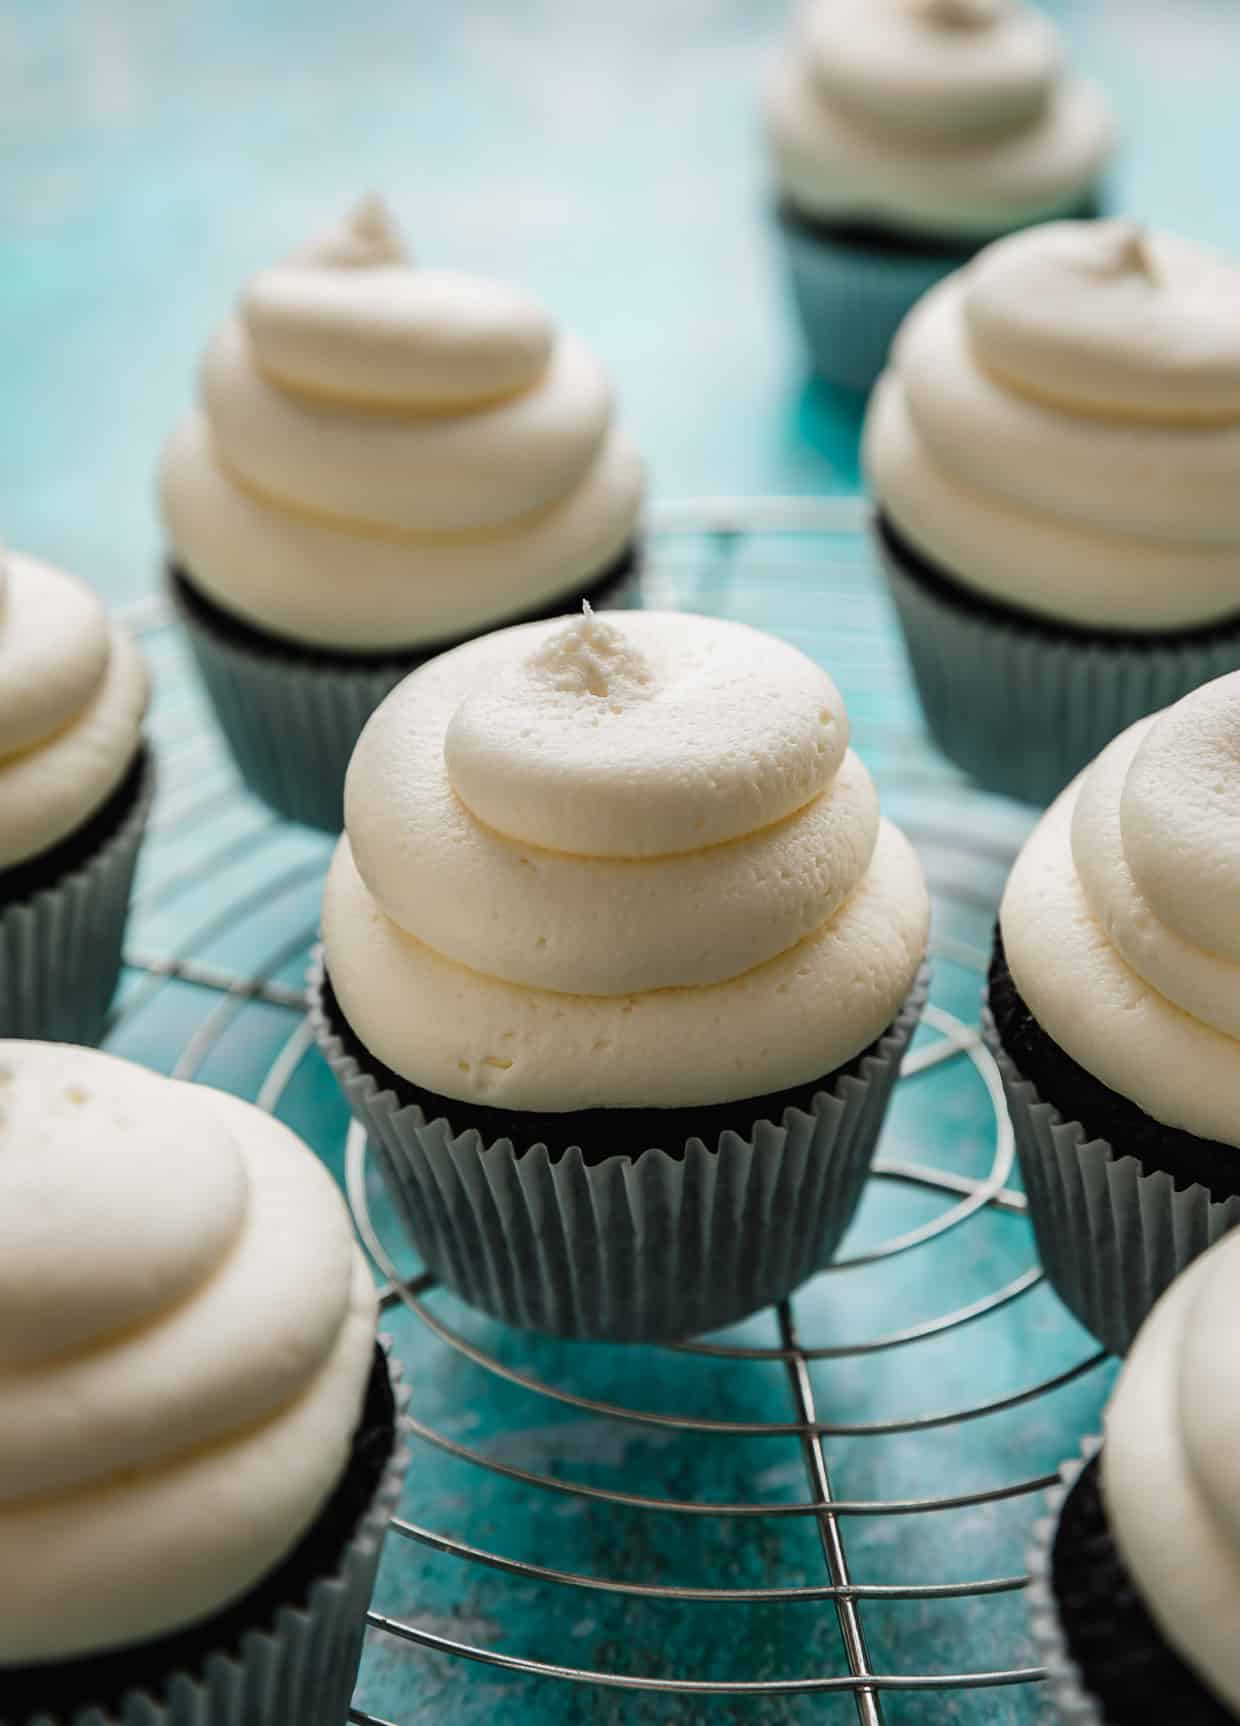 Chocolate cupcakes topped with a billowy smooth Whipped Cream Frosting on a turquoise background.